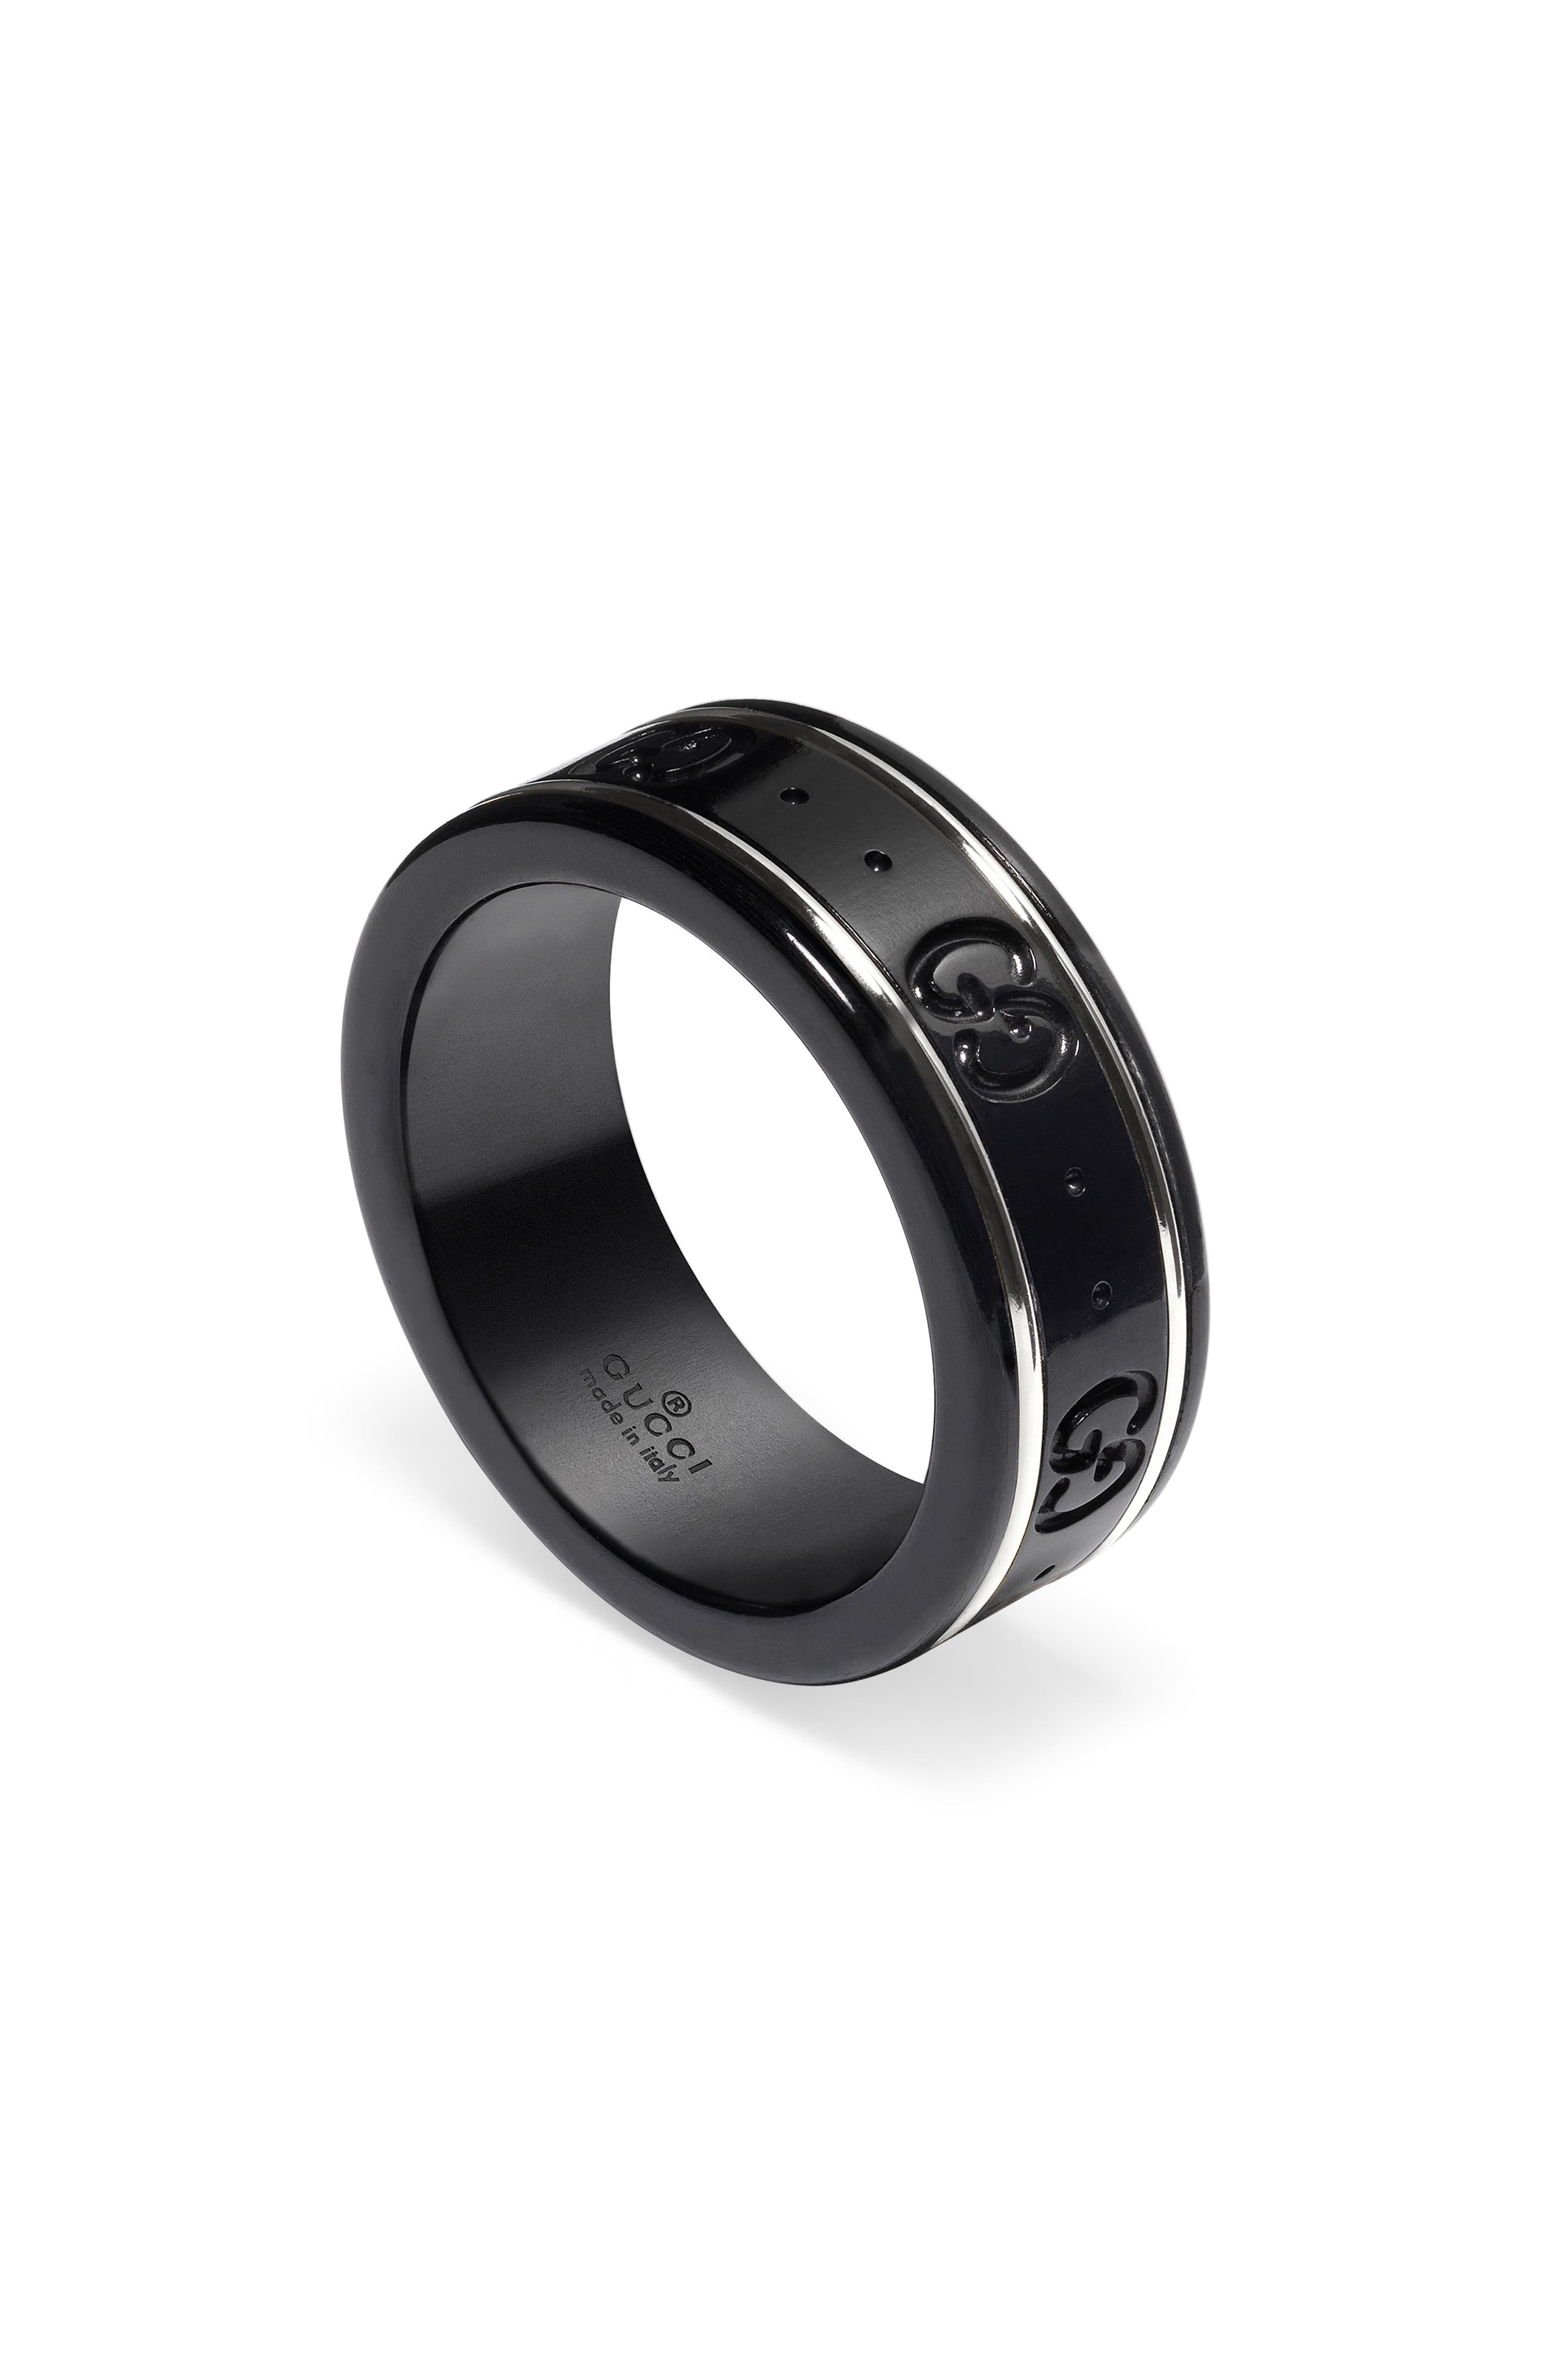 Gucci Icon Band Ring in Black/White Gold at Nordstrom, Size 6.25 Us